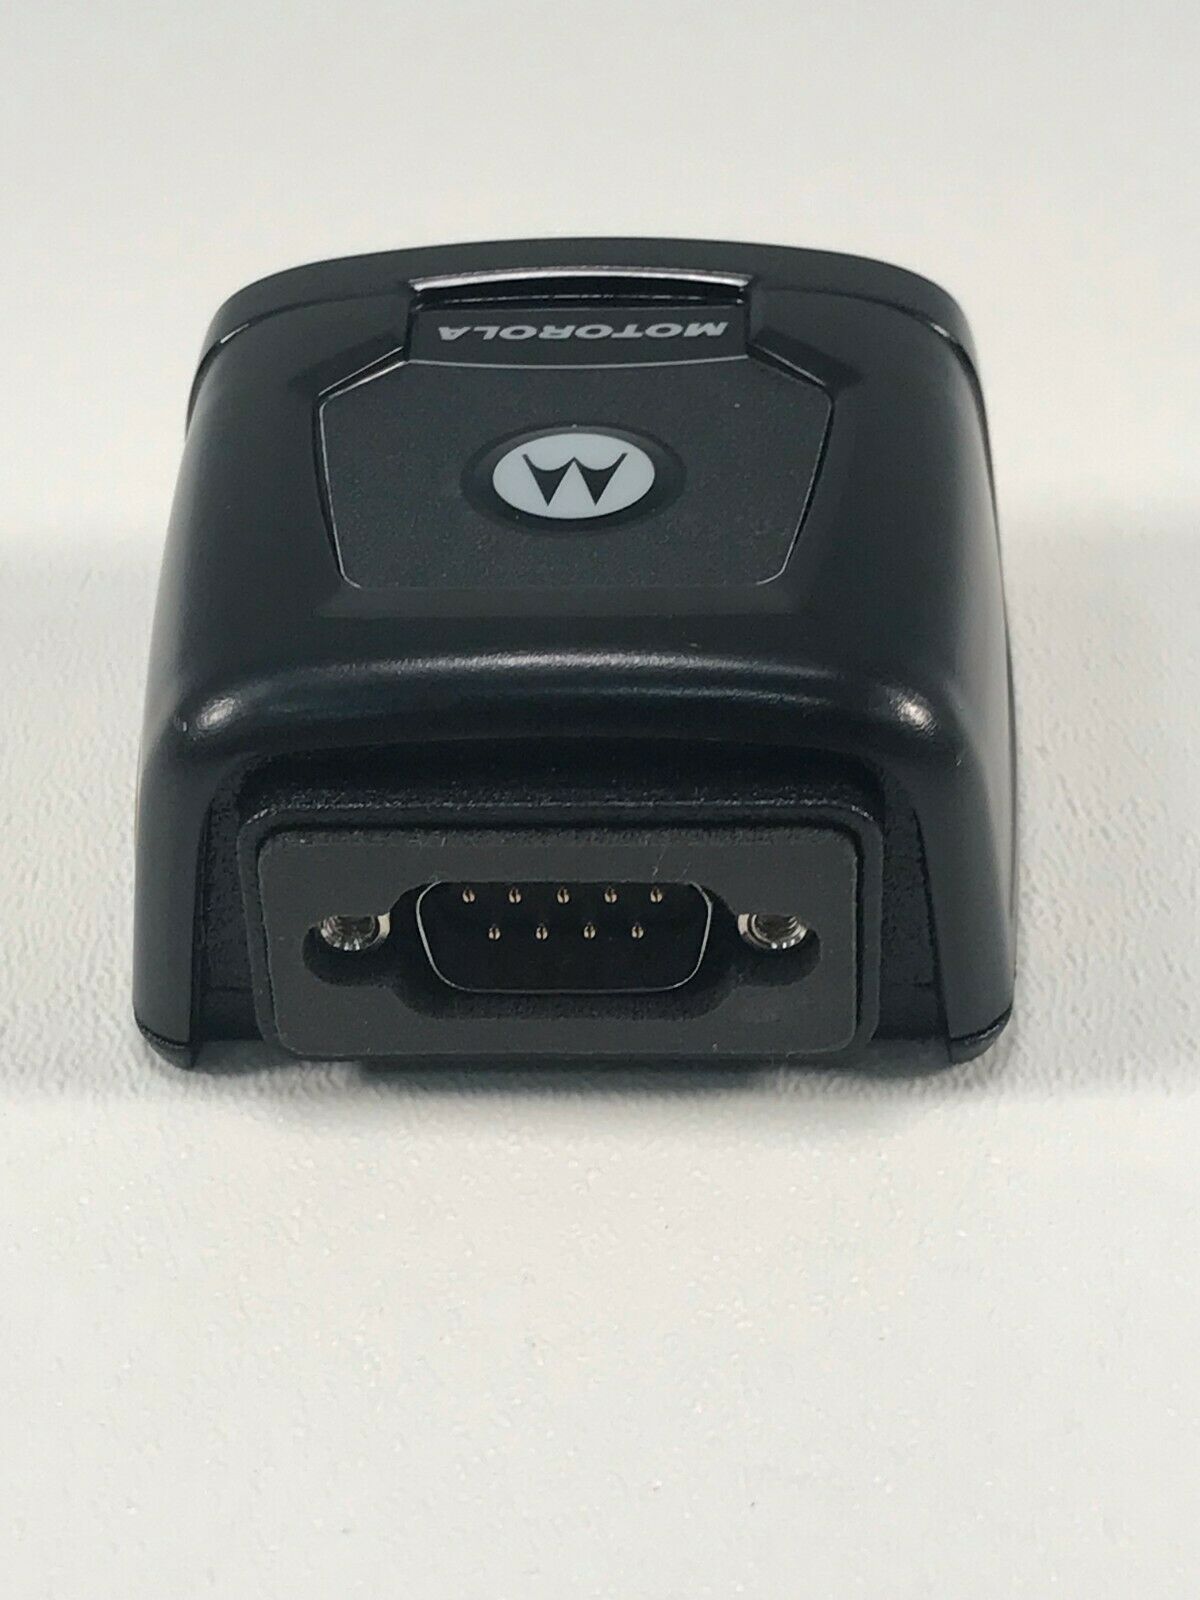 Motorola/Symbol DS457 w/USB Cable- Excellent Condition! Free Same Day Shipping!